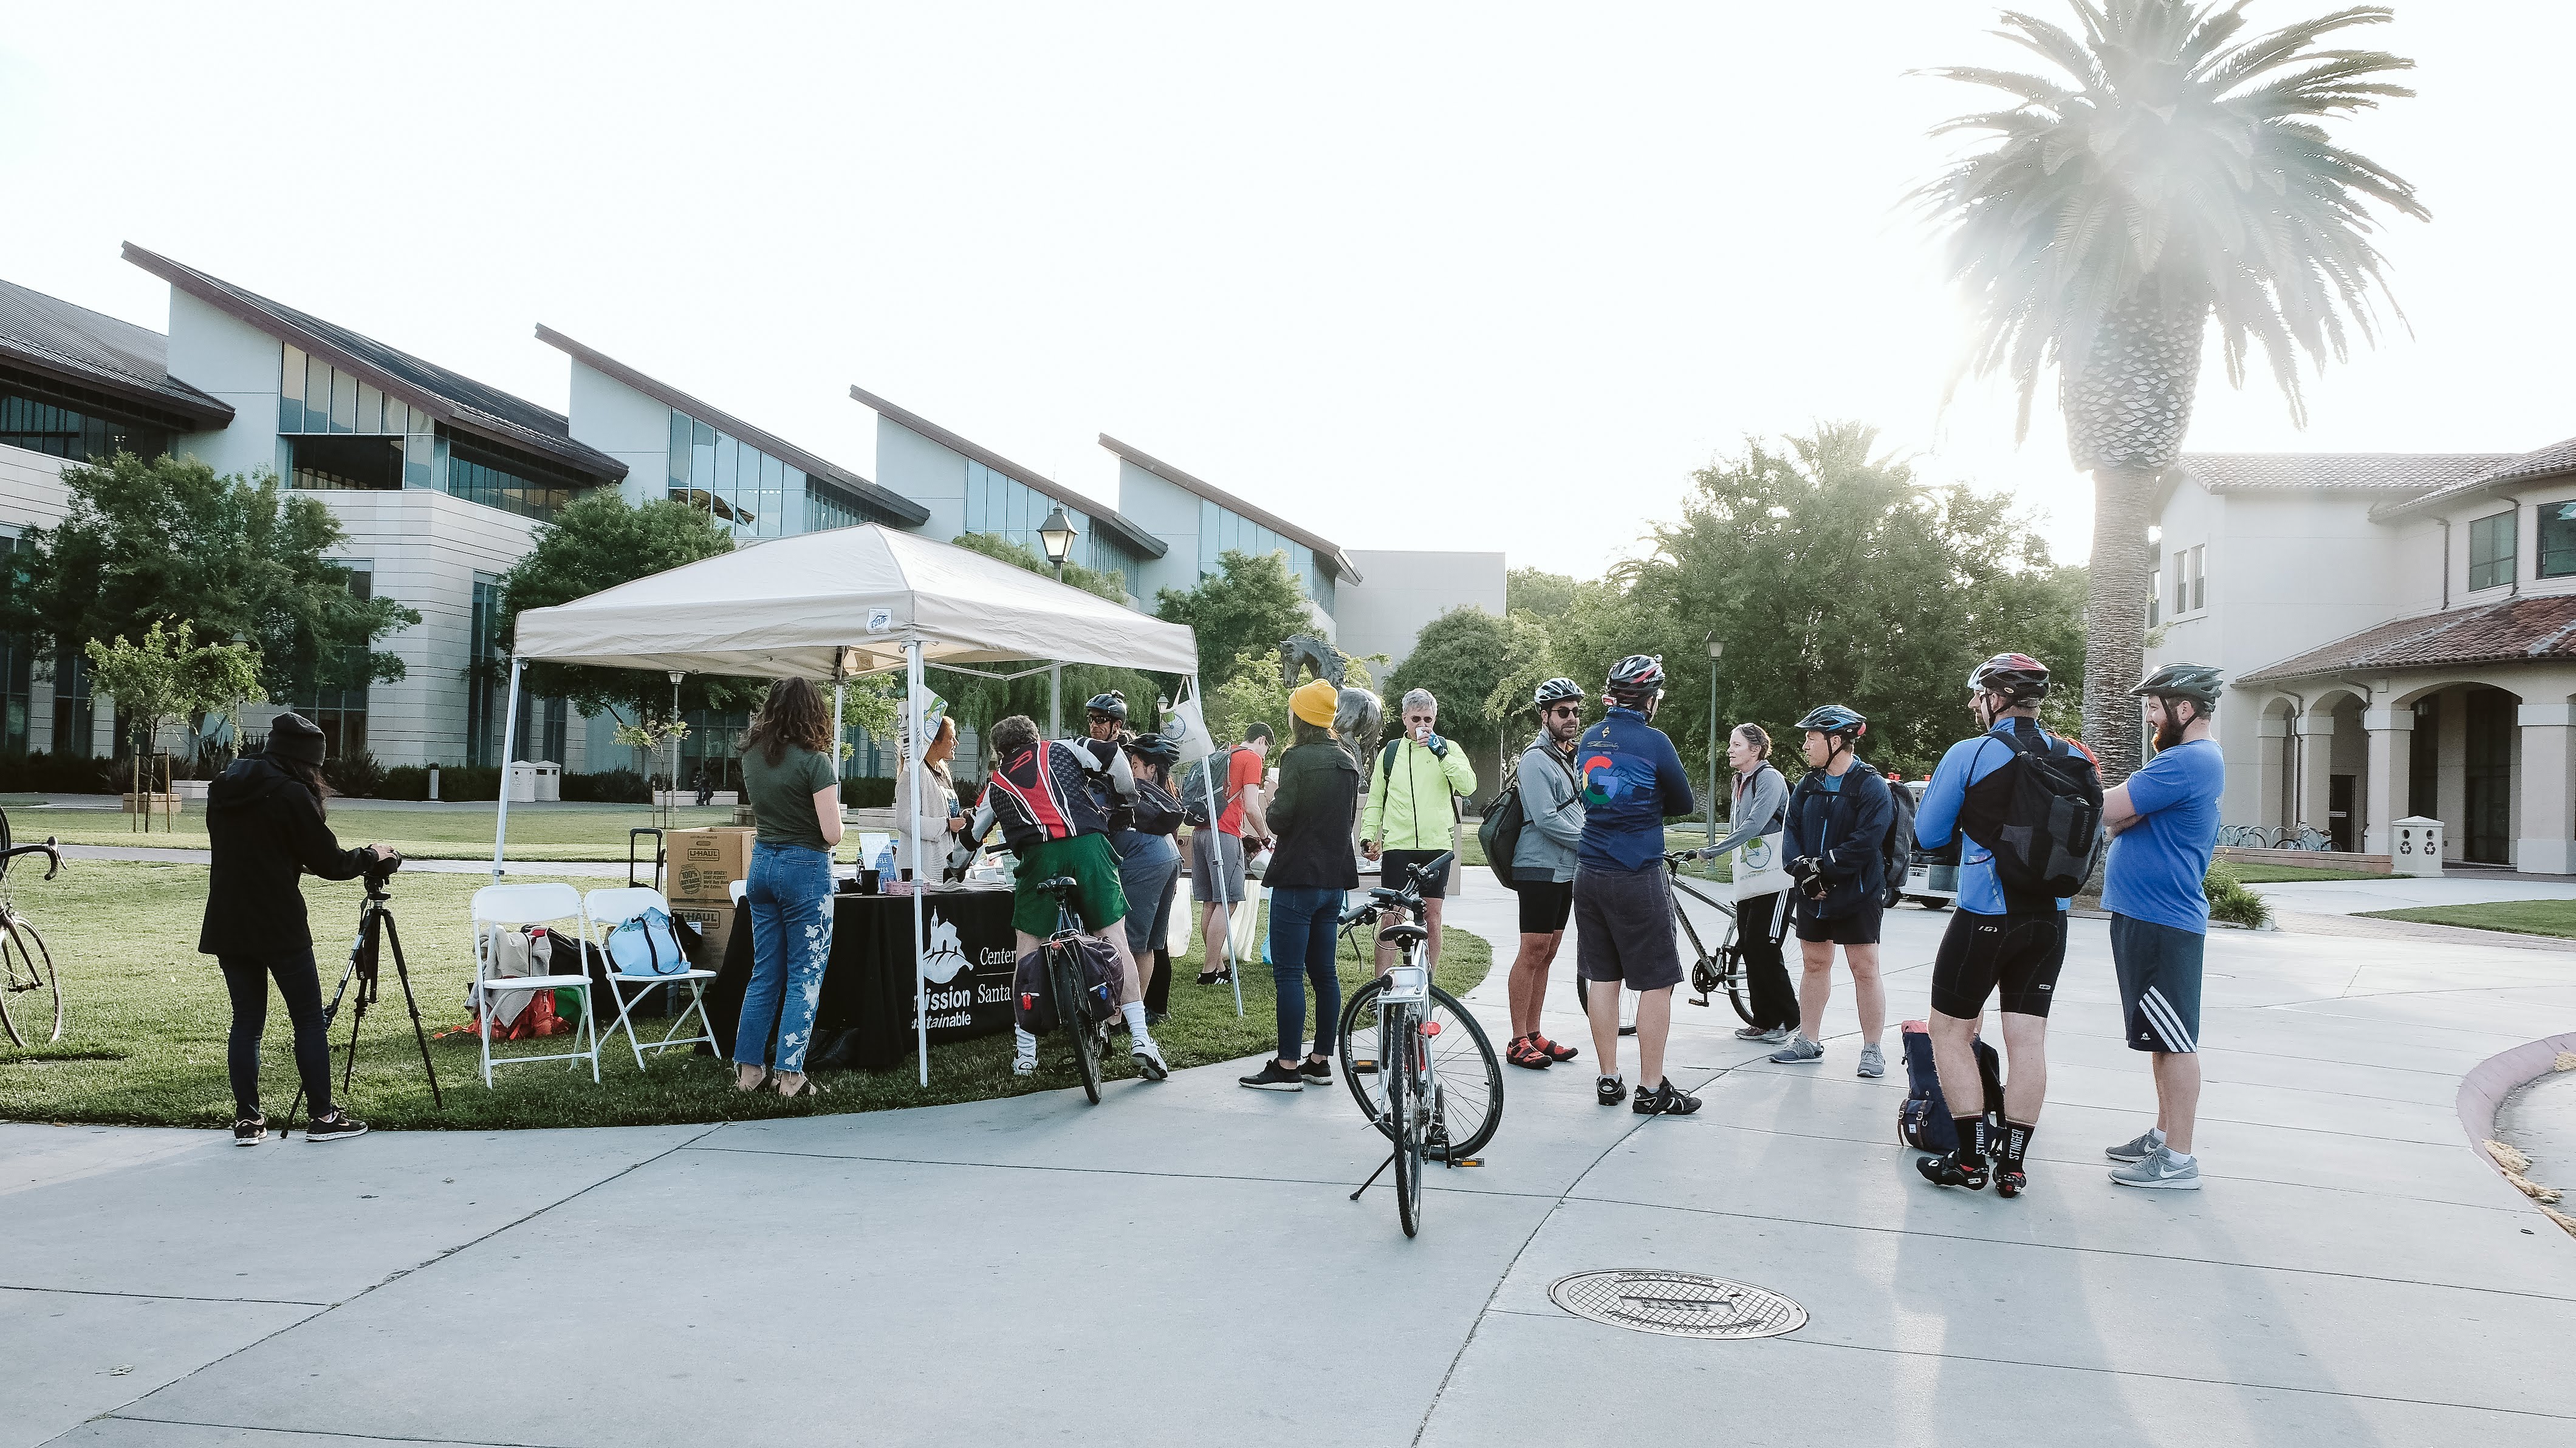 Many cyclists gathering near SCU's Energizer Station for snacks and goodies.